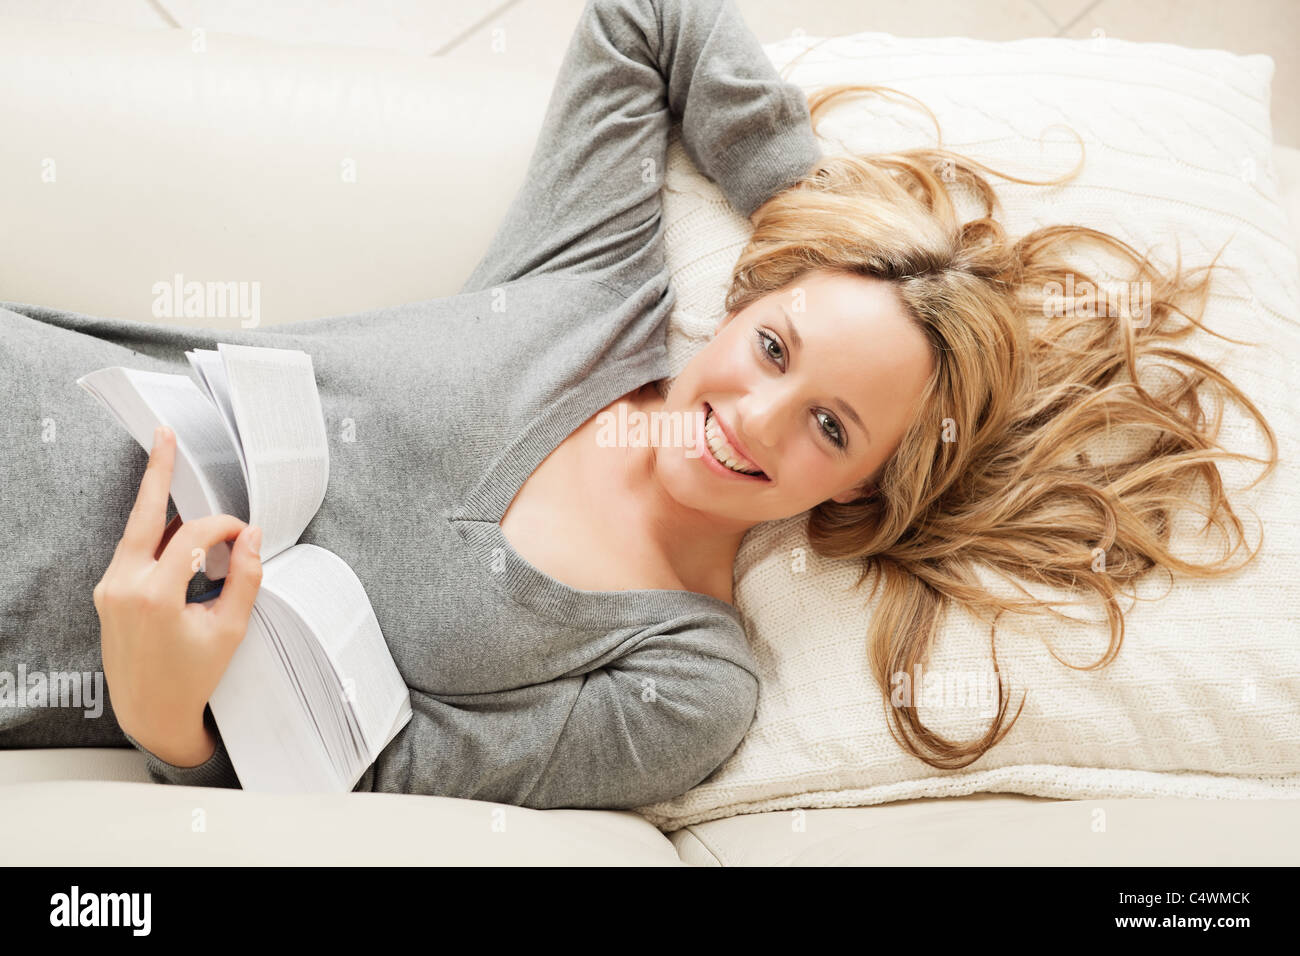 High angle view on smiling blond woman lying on sofa with book Stock Photo